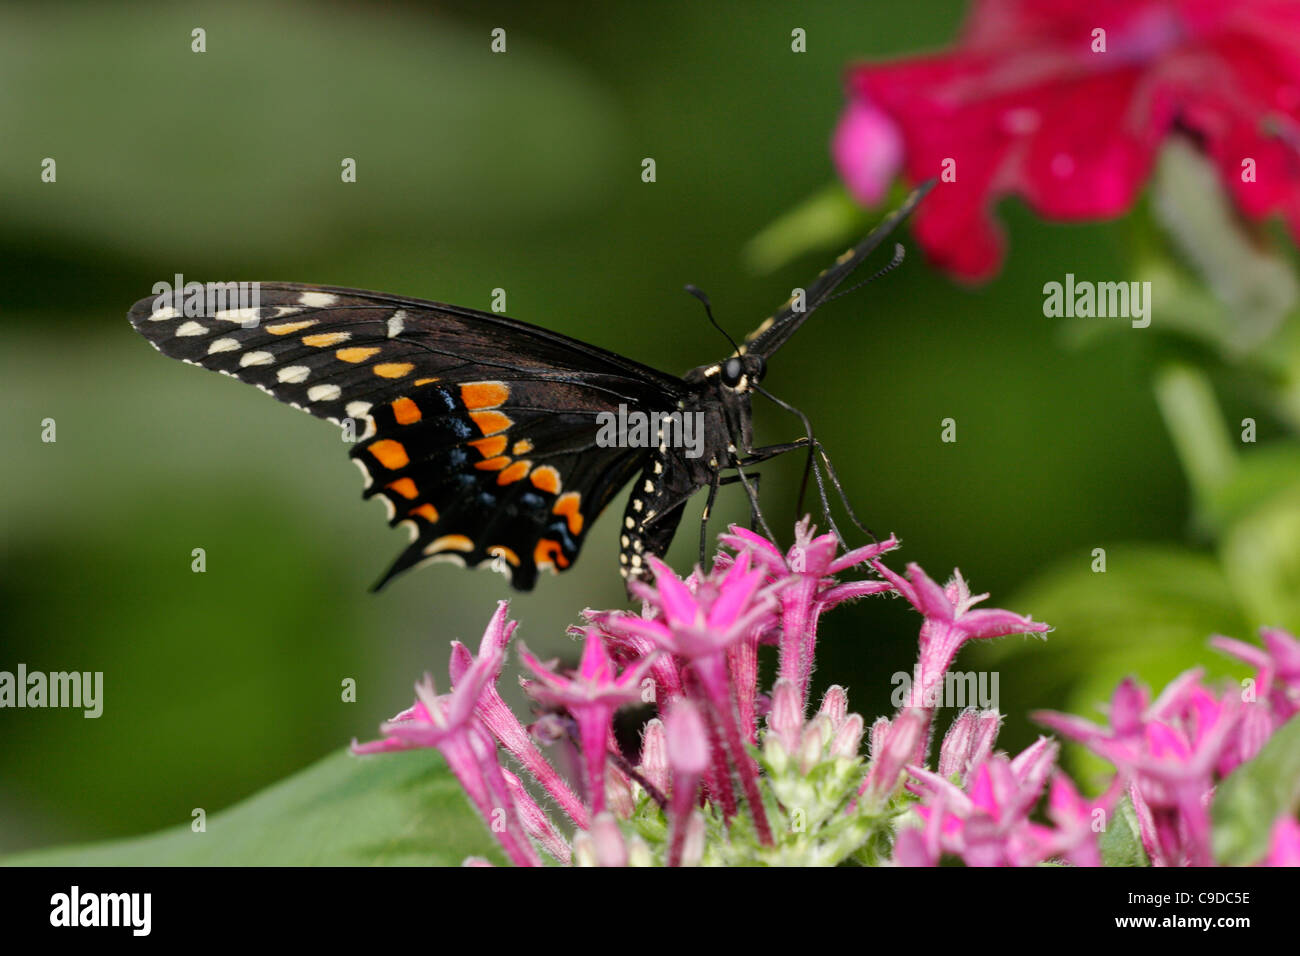 Close-up of a Black Swallowtail Butterfly on a flower pollinating (Papilio polyxenes) Stock Photo